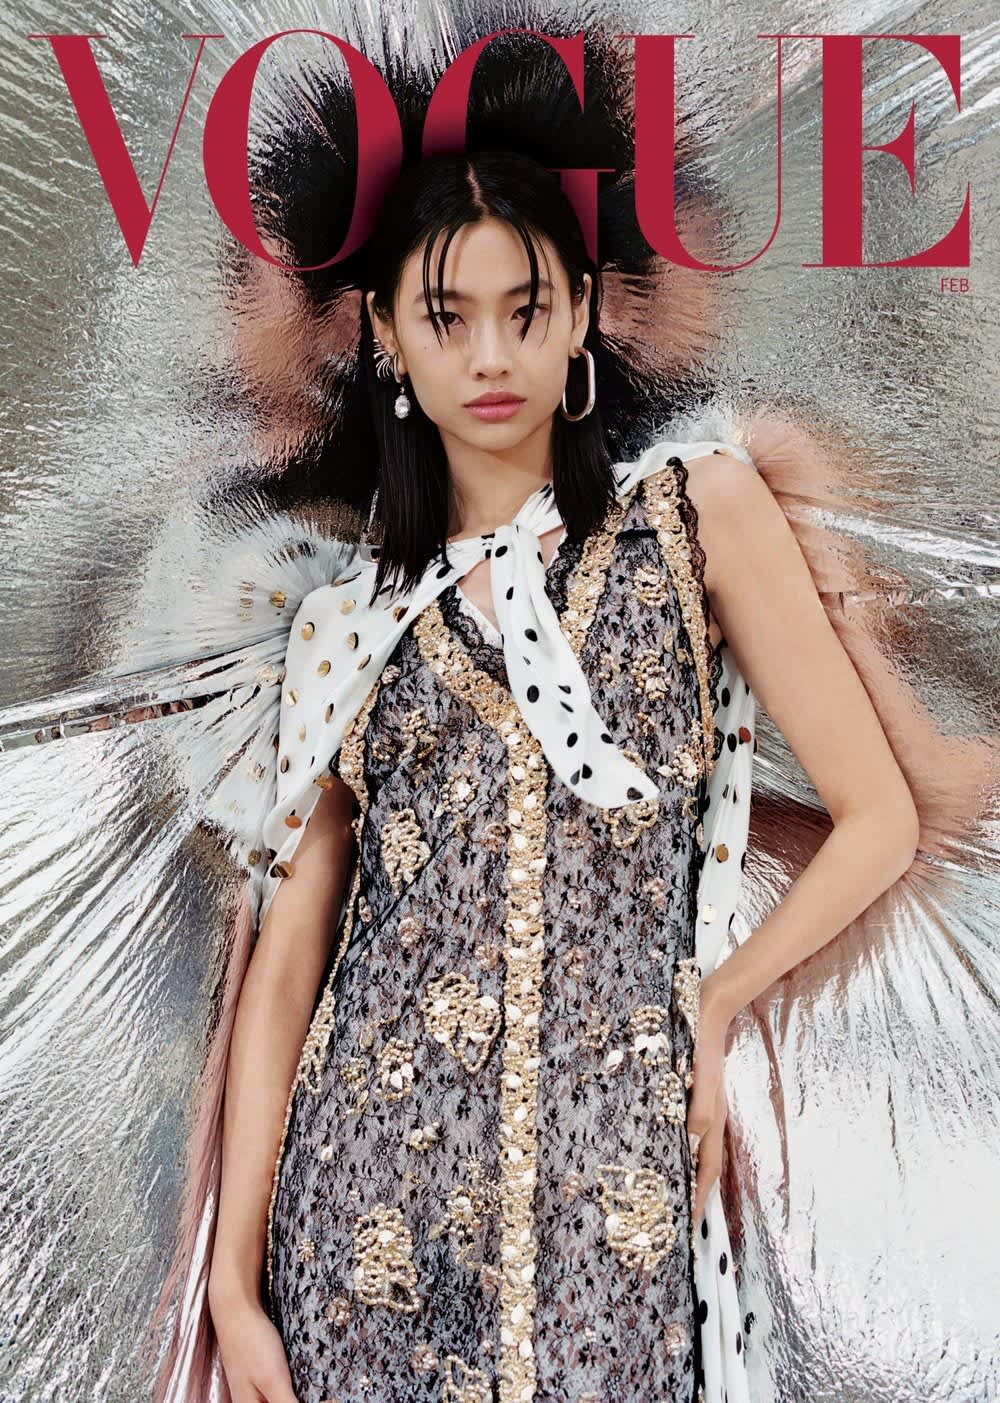 Hoyeon-Jung-by-Harley-Weir-Vogue-US-February-2022+(8)